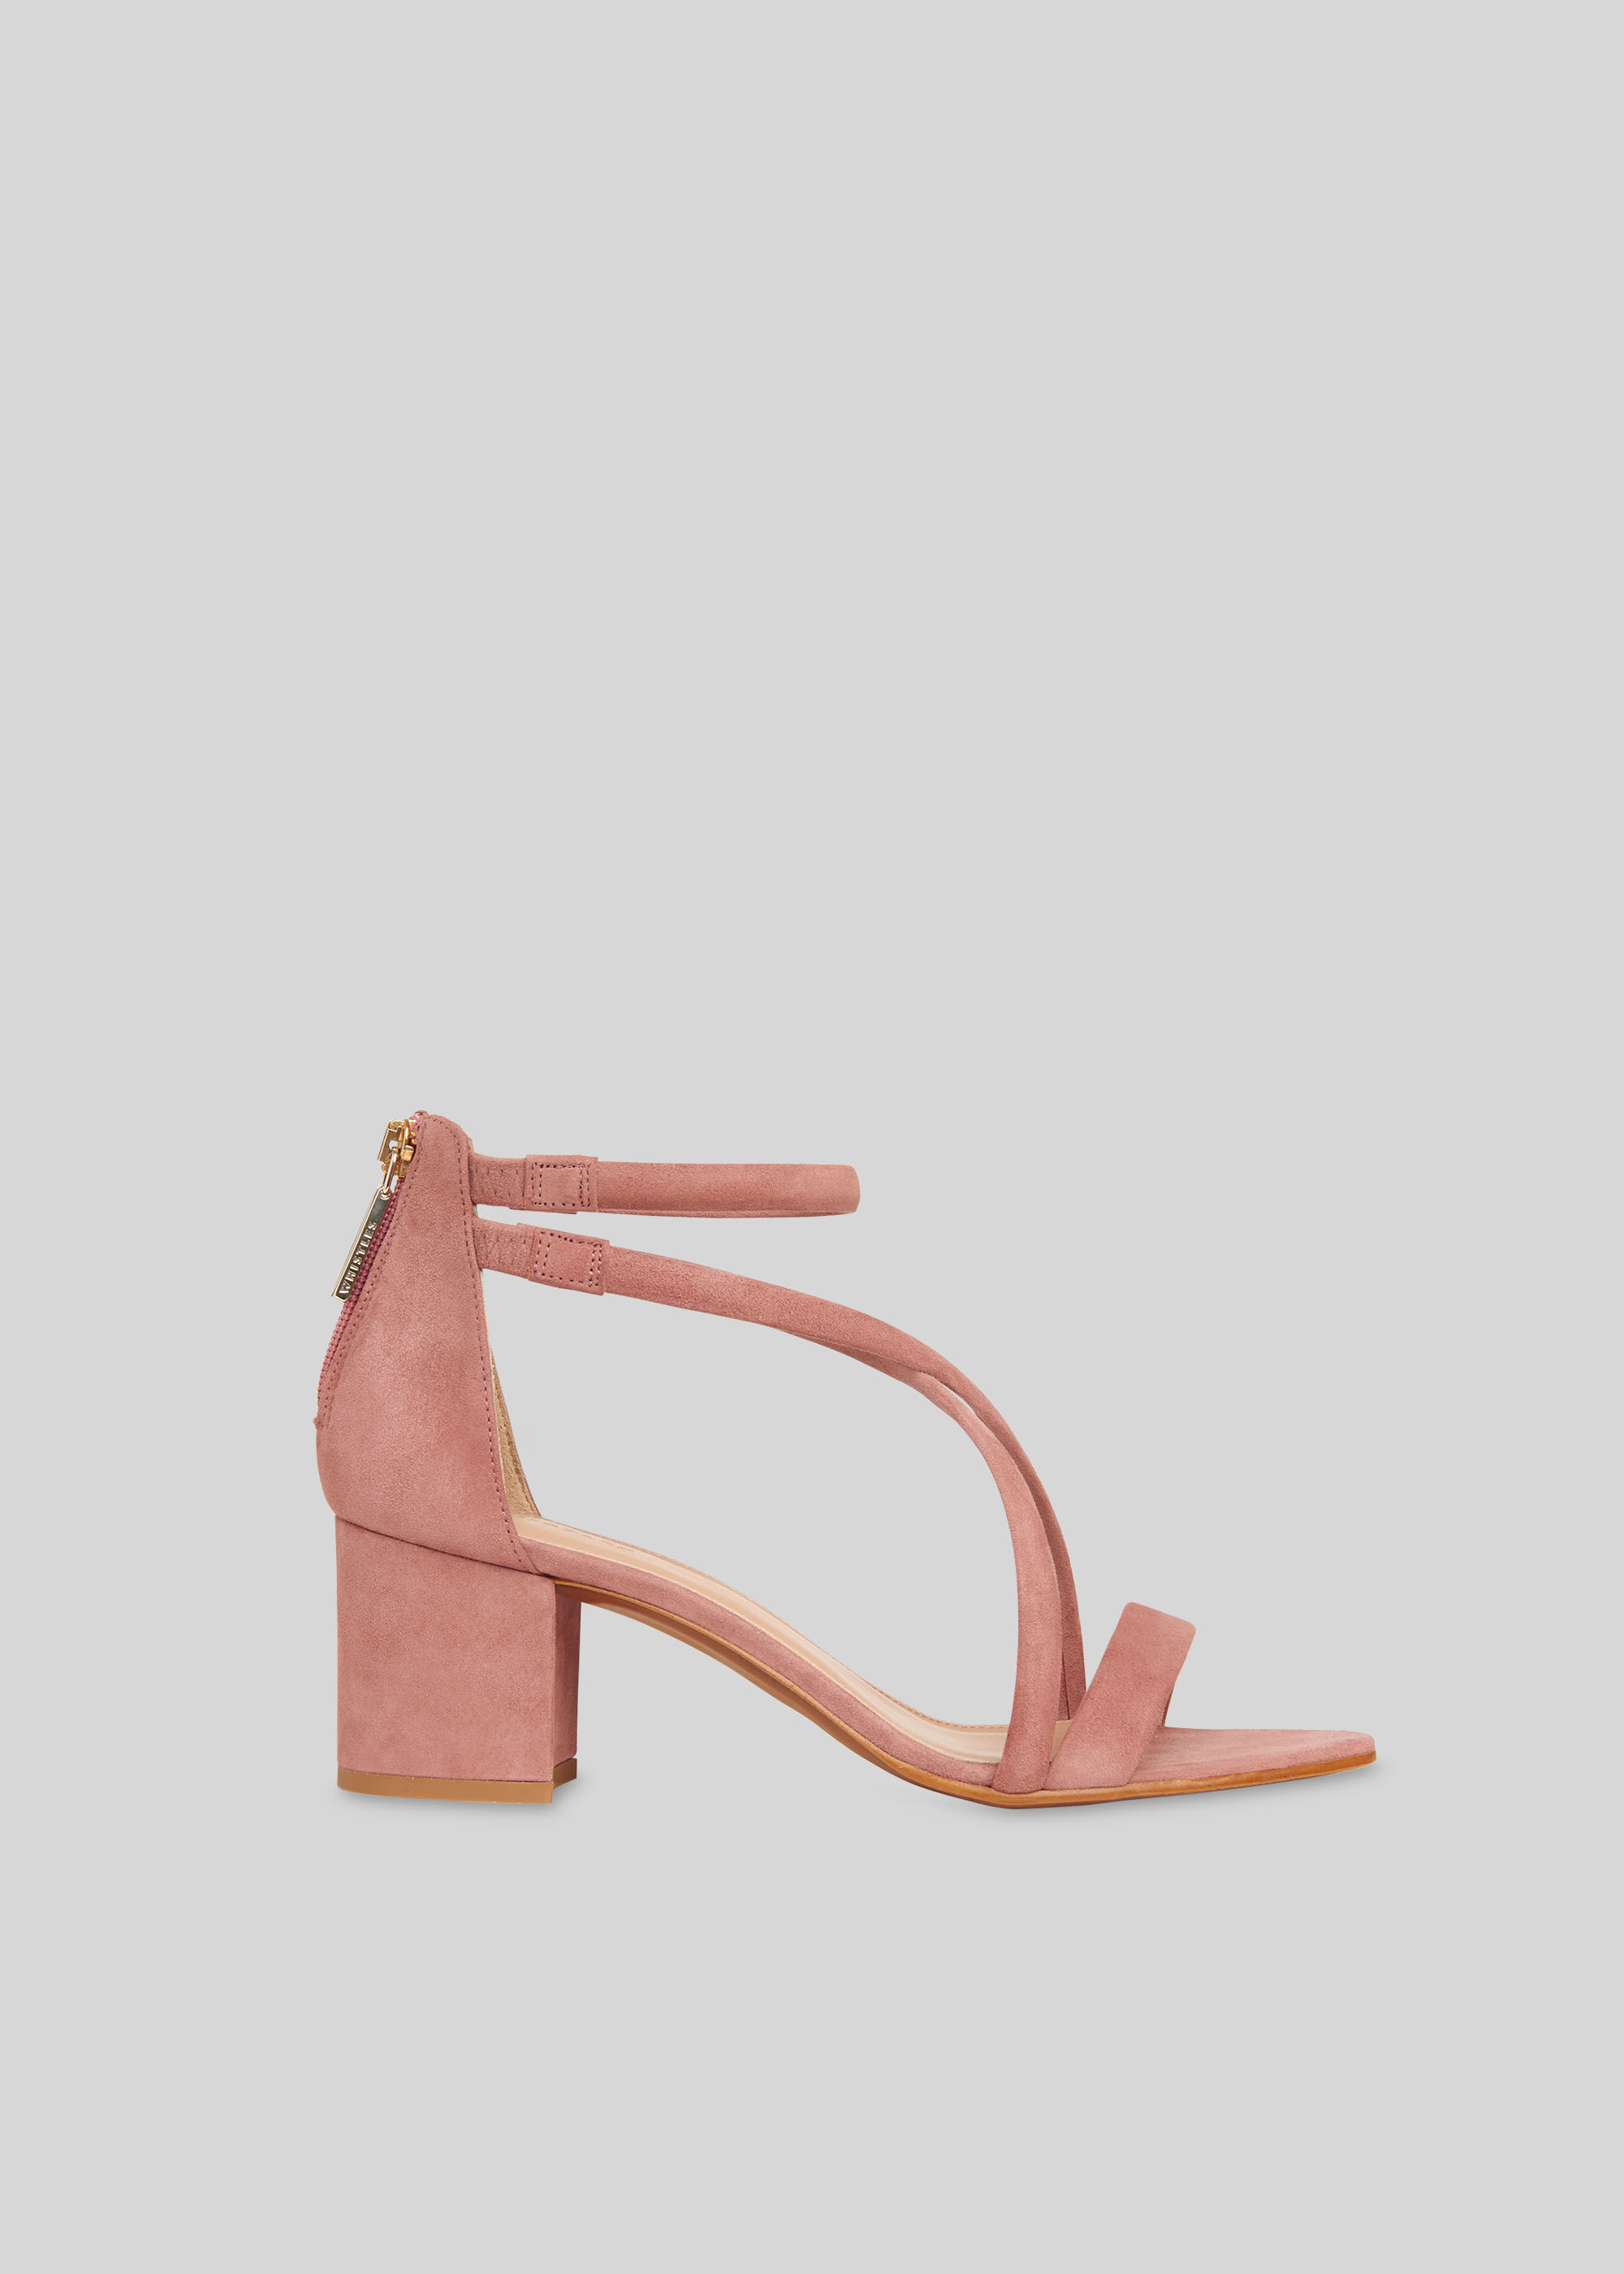 nude strappy shoes